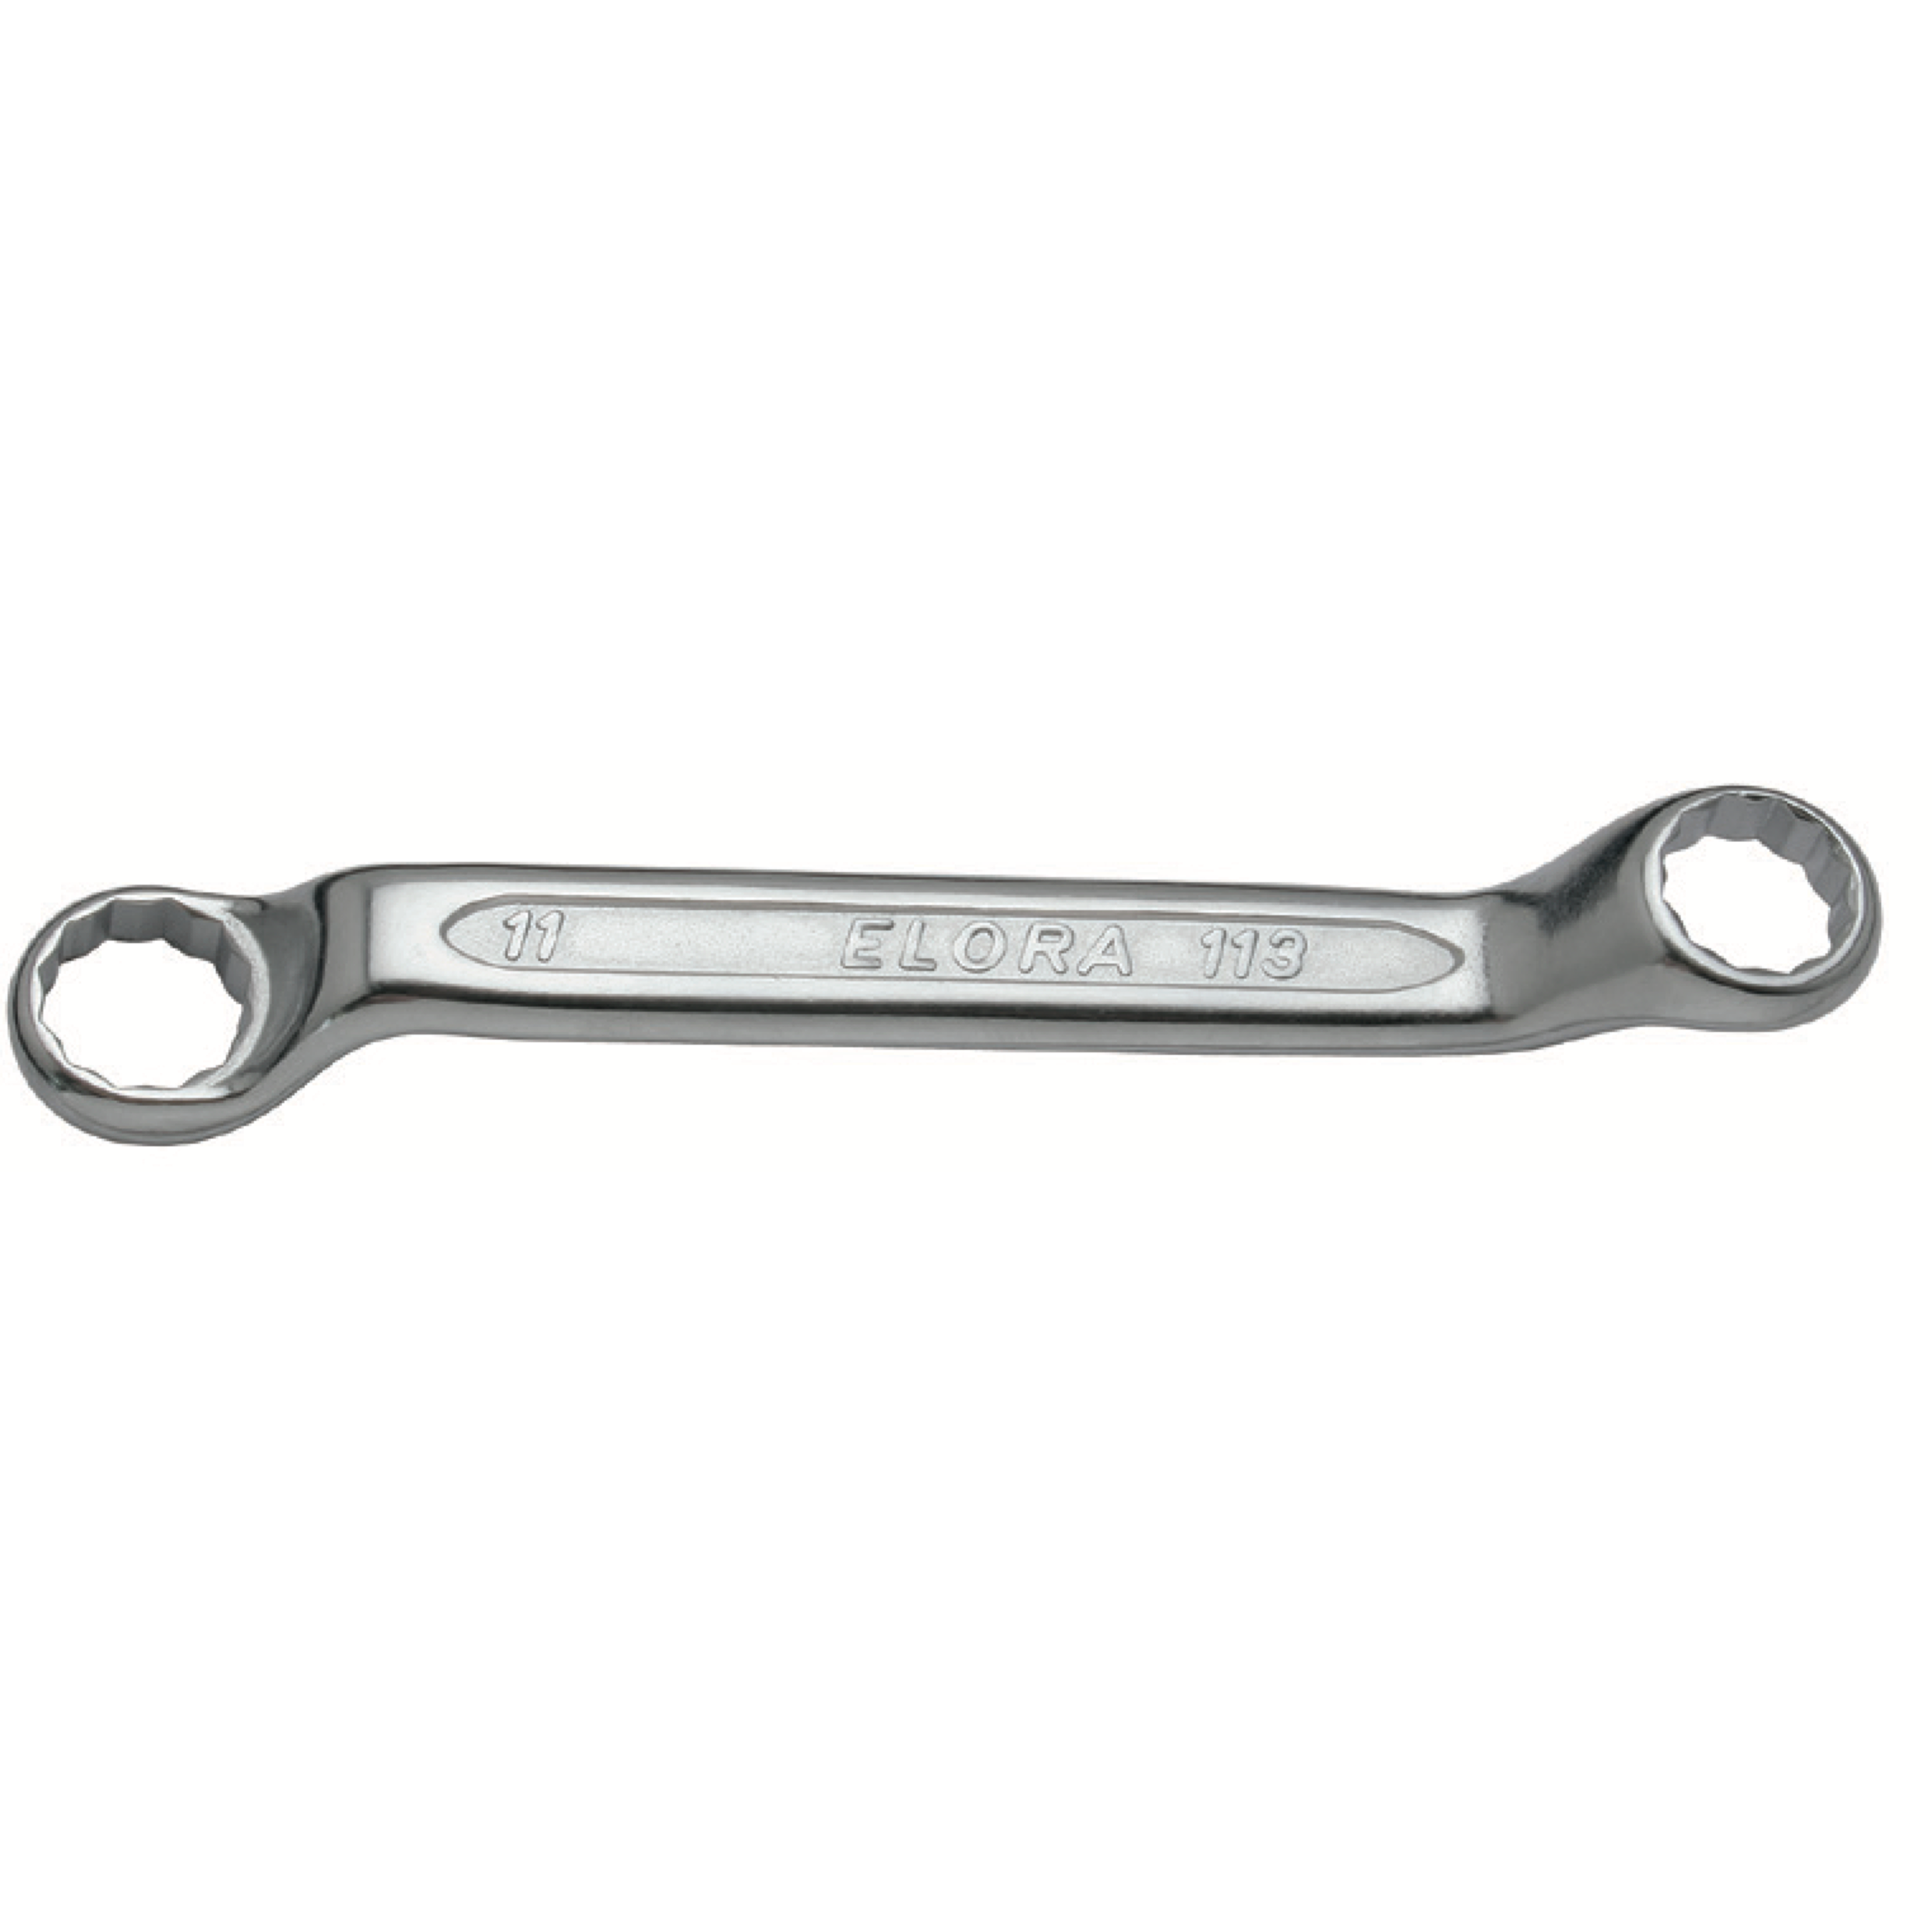 ELORA OMS-19 Module Double Ended Ring Spanner (ELORA Tools) - Premium Double Ended Ring Spanner from ELORA - Shop now at Yew Aik.